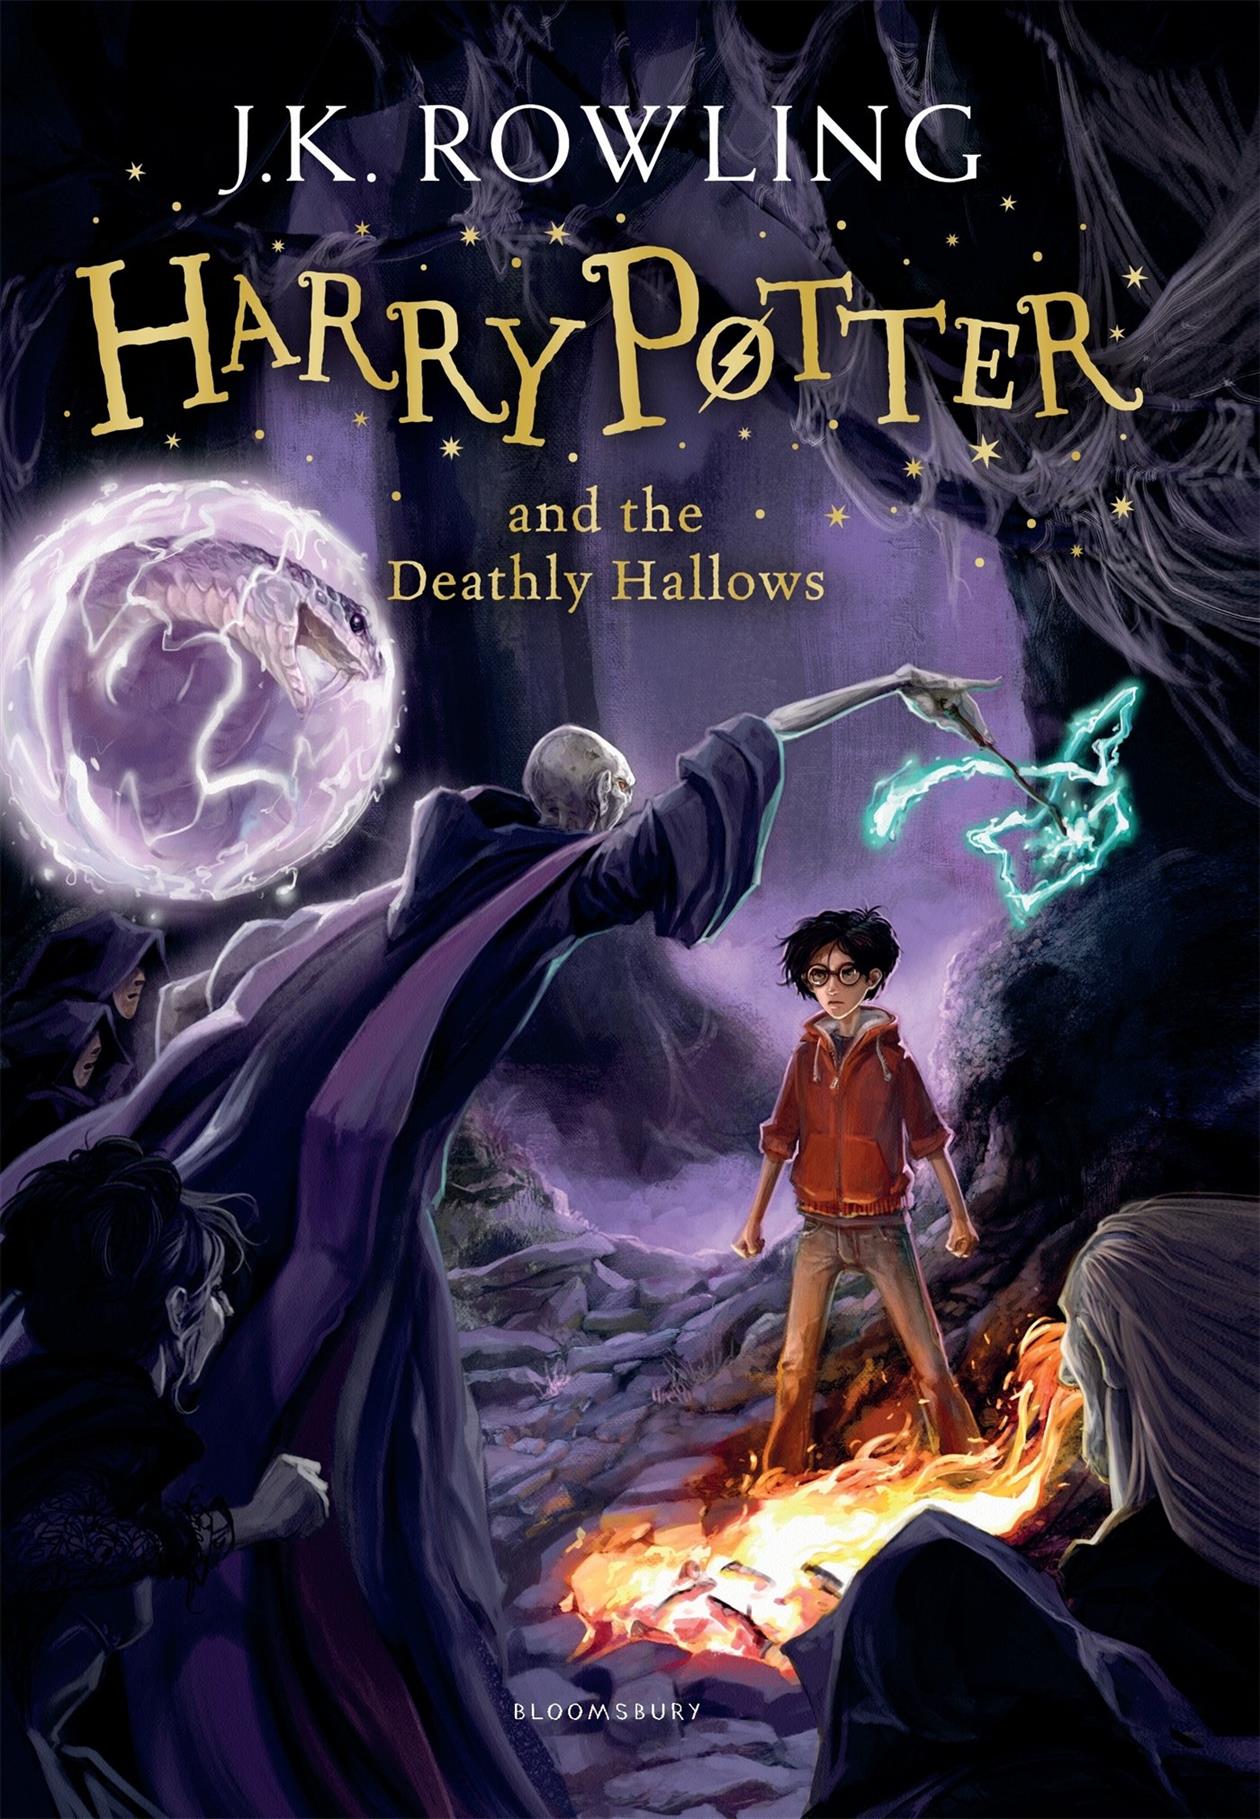 Harry Potter and the Deathly Hallows Novel by J. K. Rowling